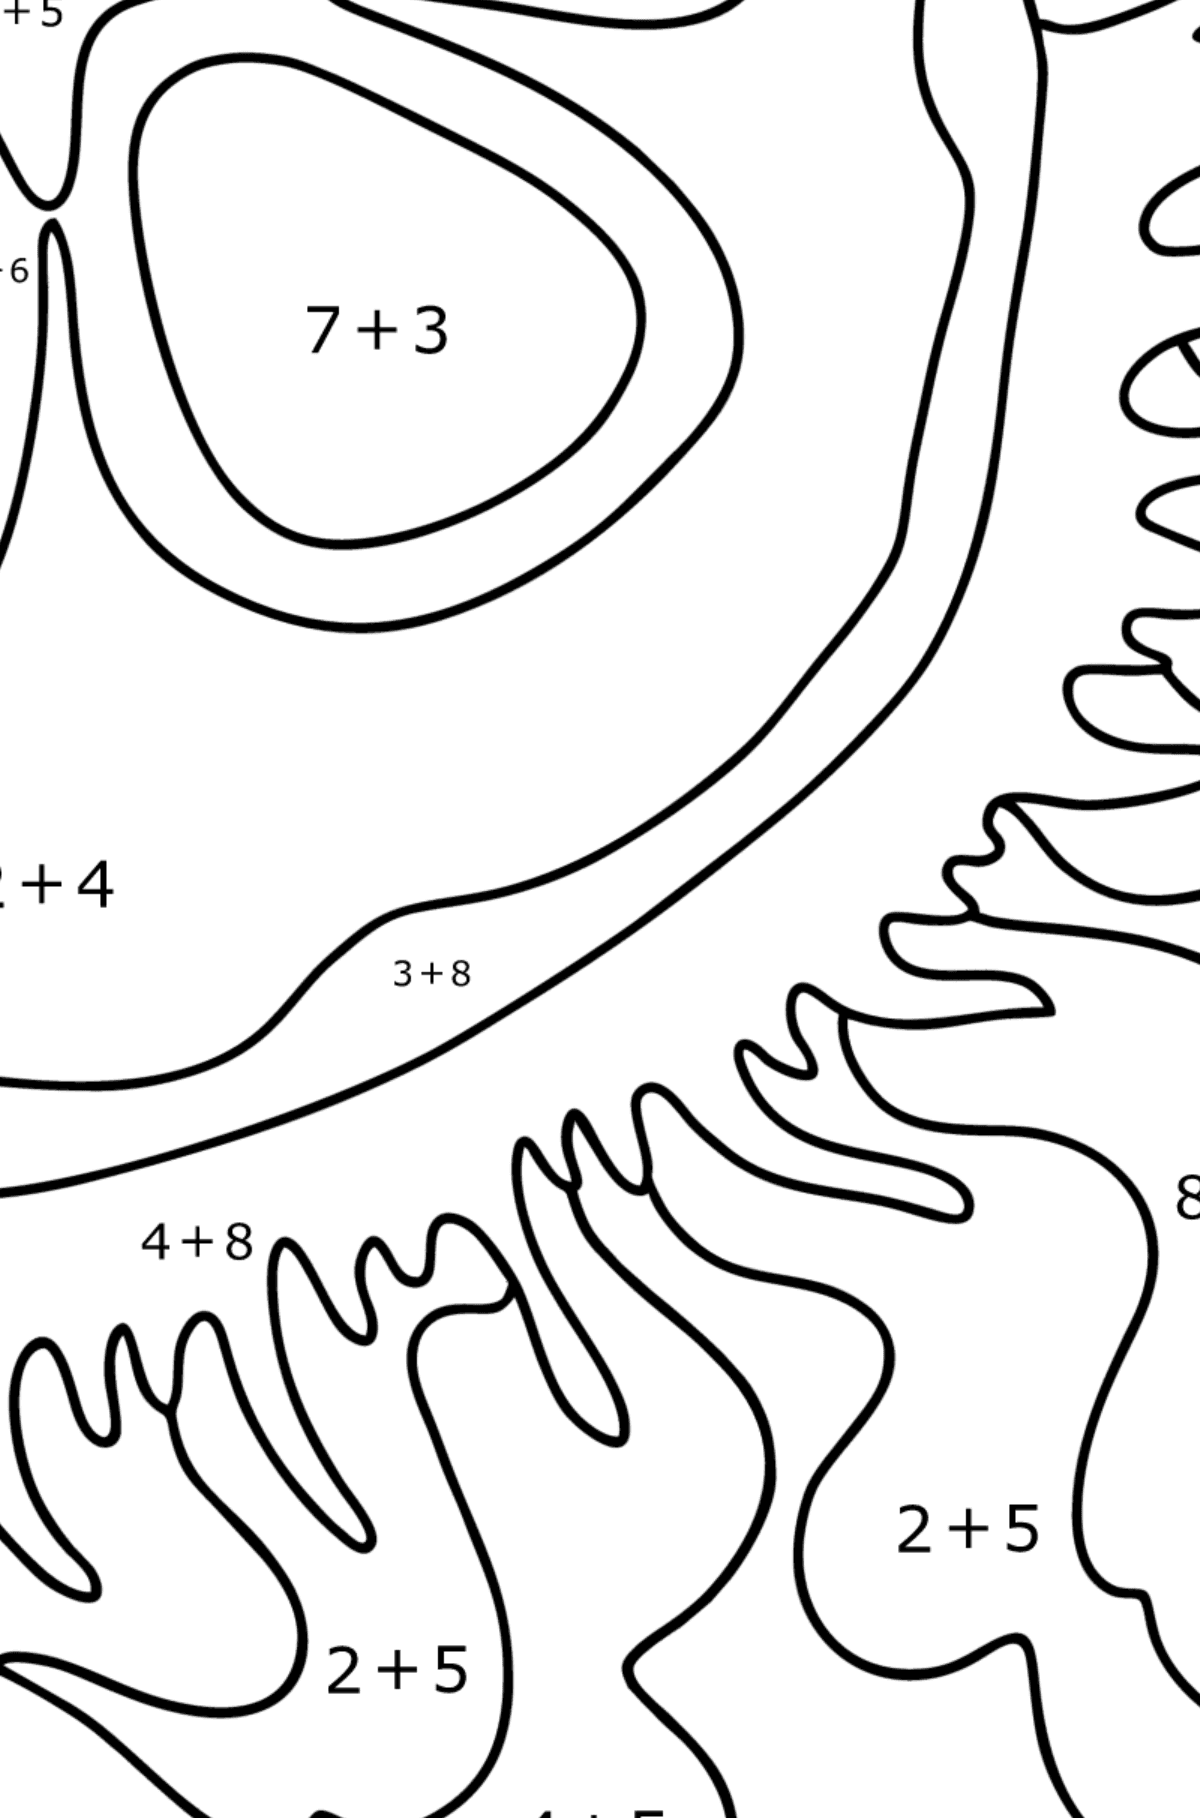 Moon jellyfish coloring page - Math Coloring - Addition for Kids